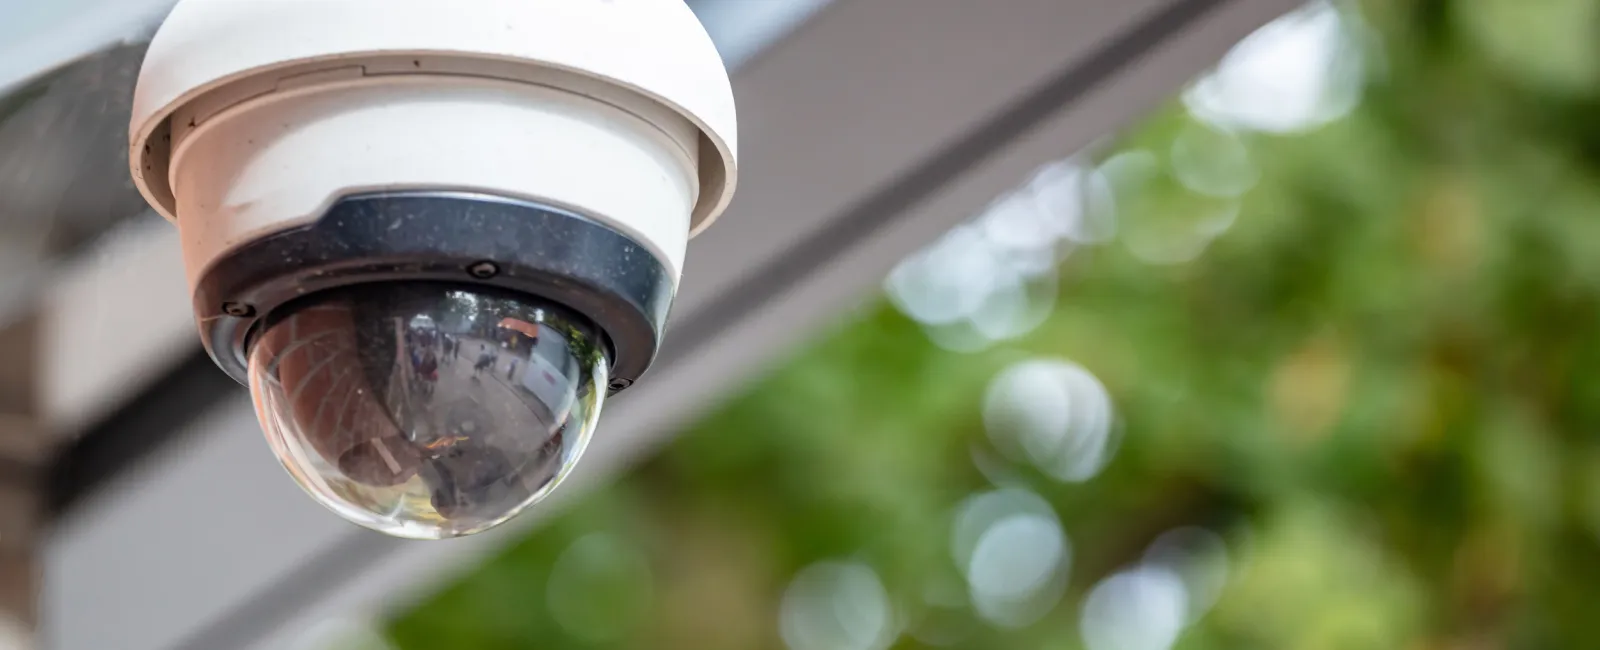 Wired vs. Wireless Security Cameras, Which is Better?